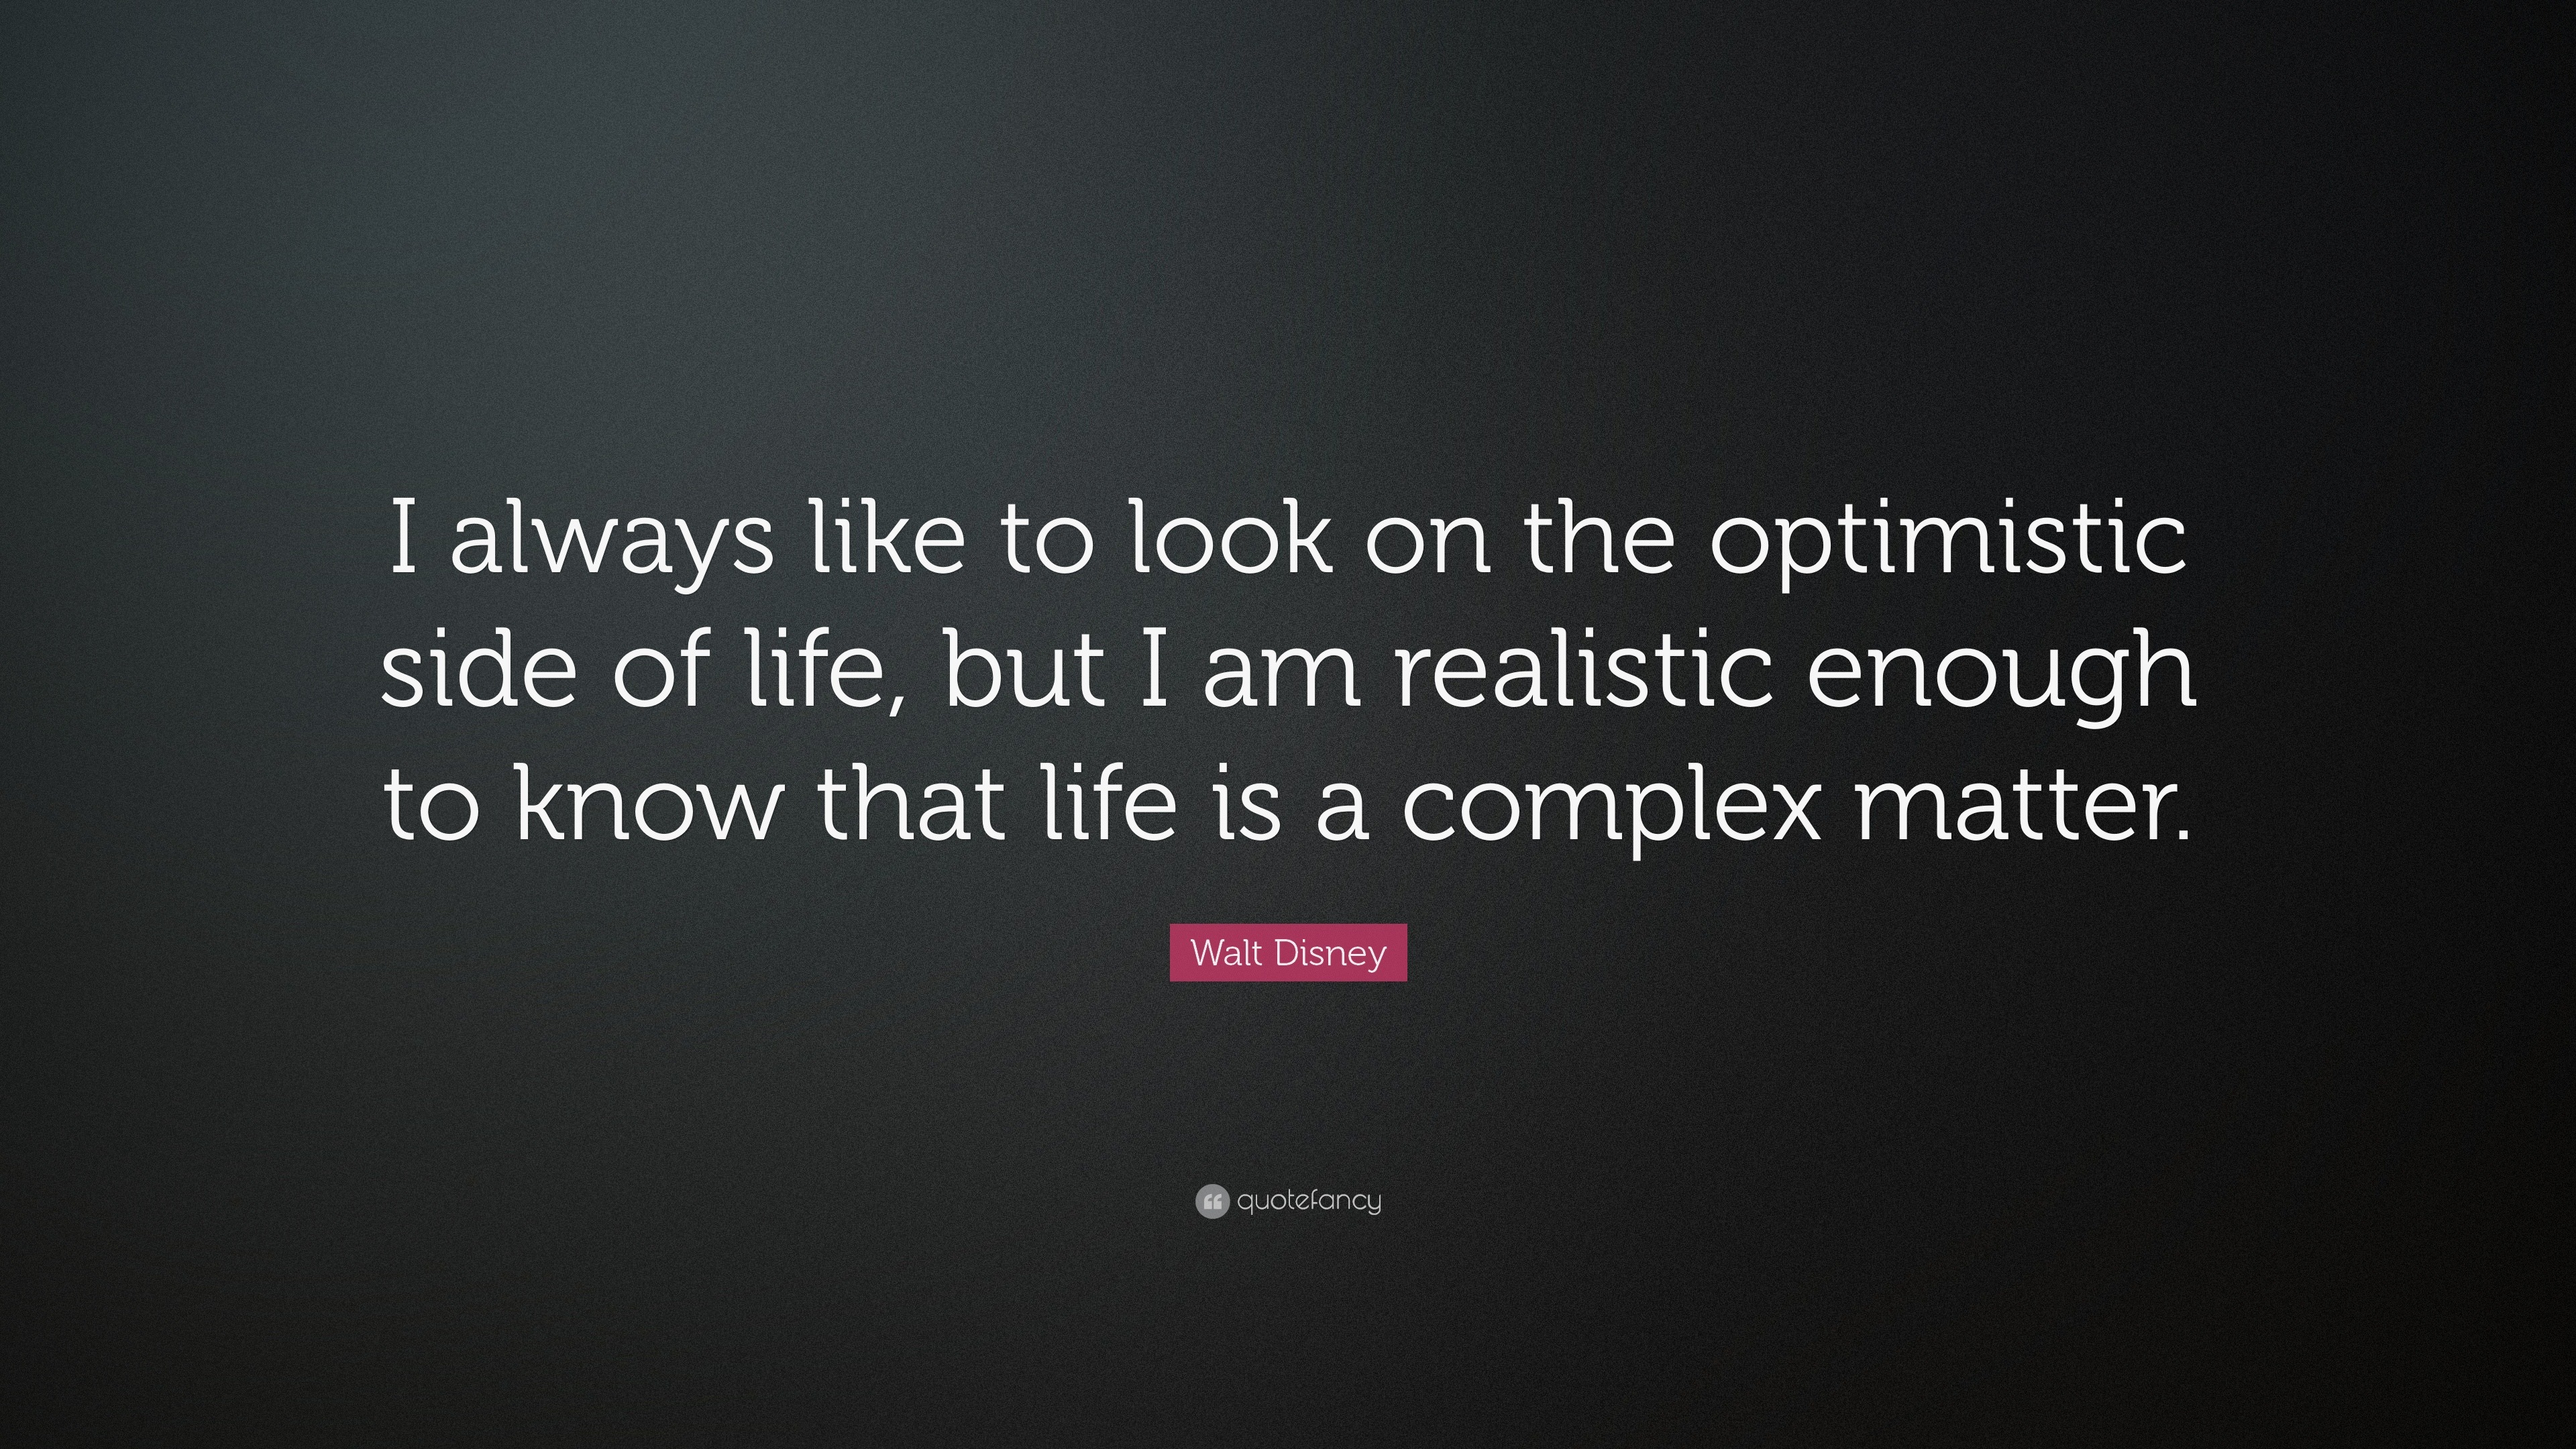 Walt Disney Quote: “I always like to look on the optimistic side of ...